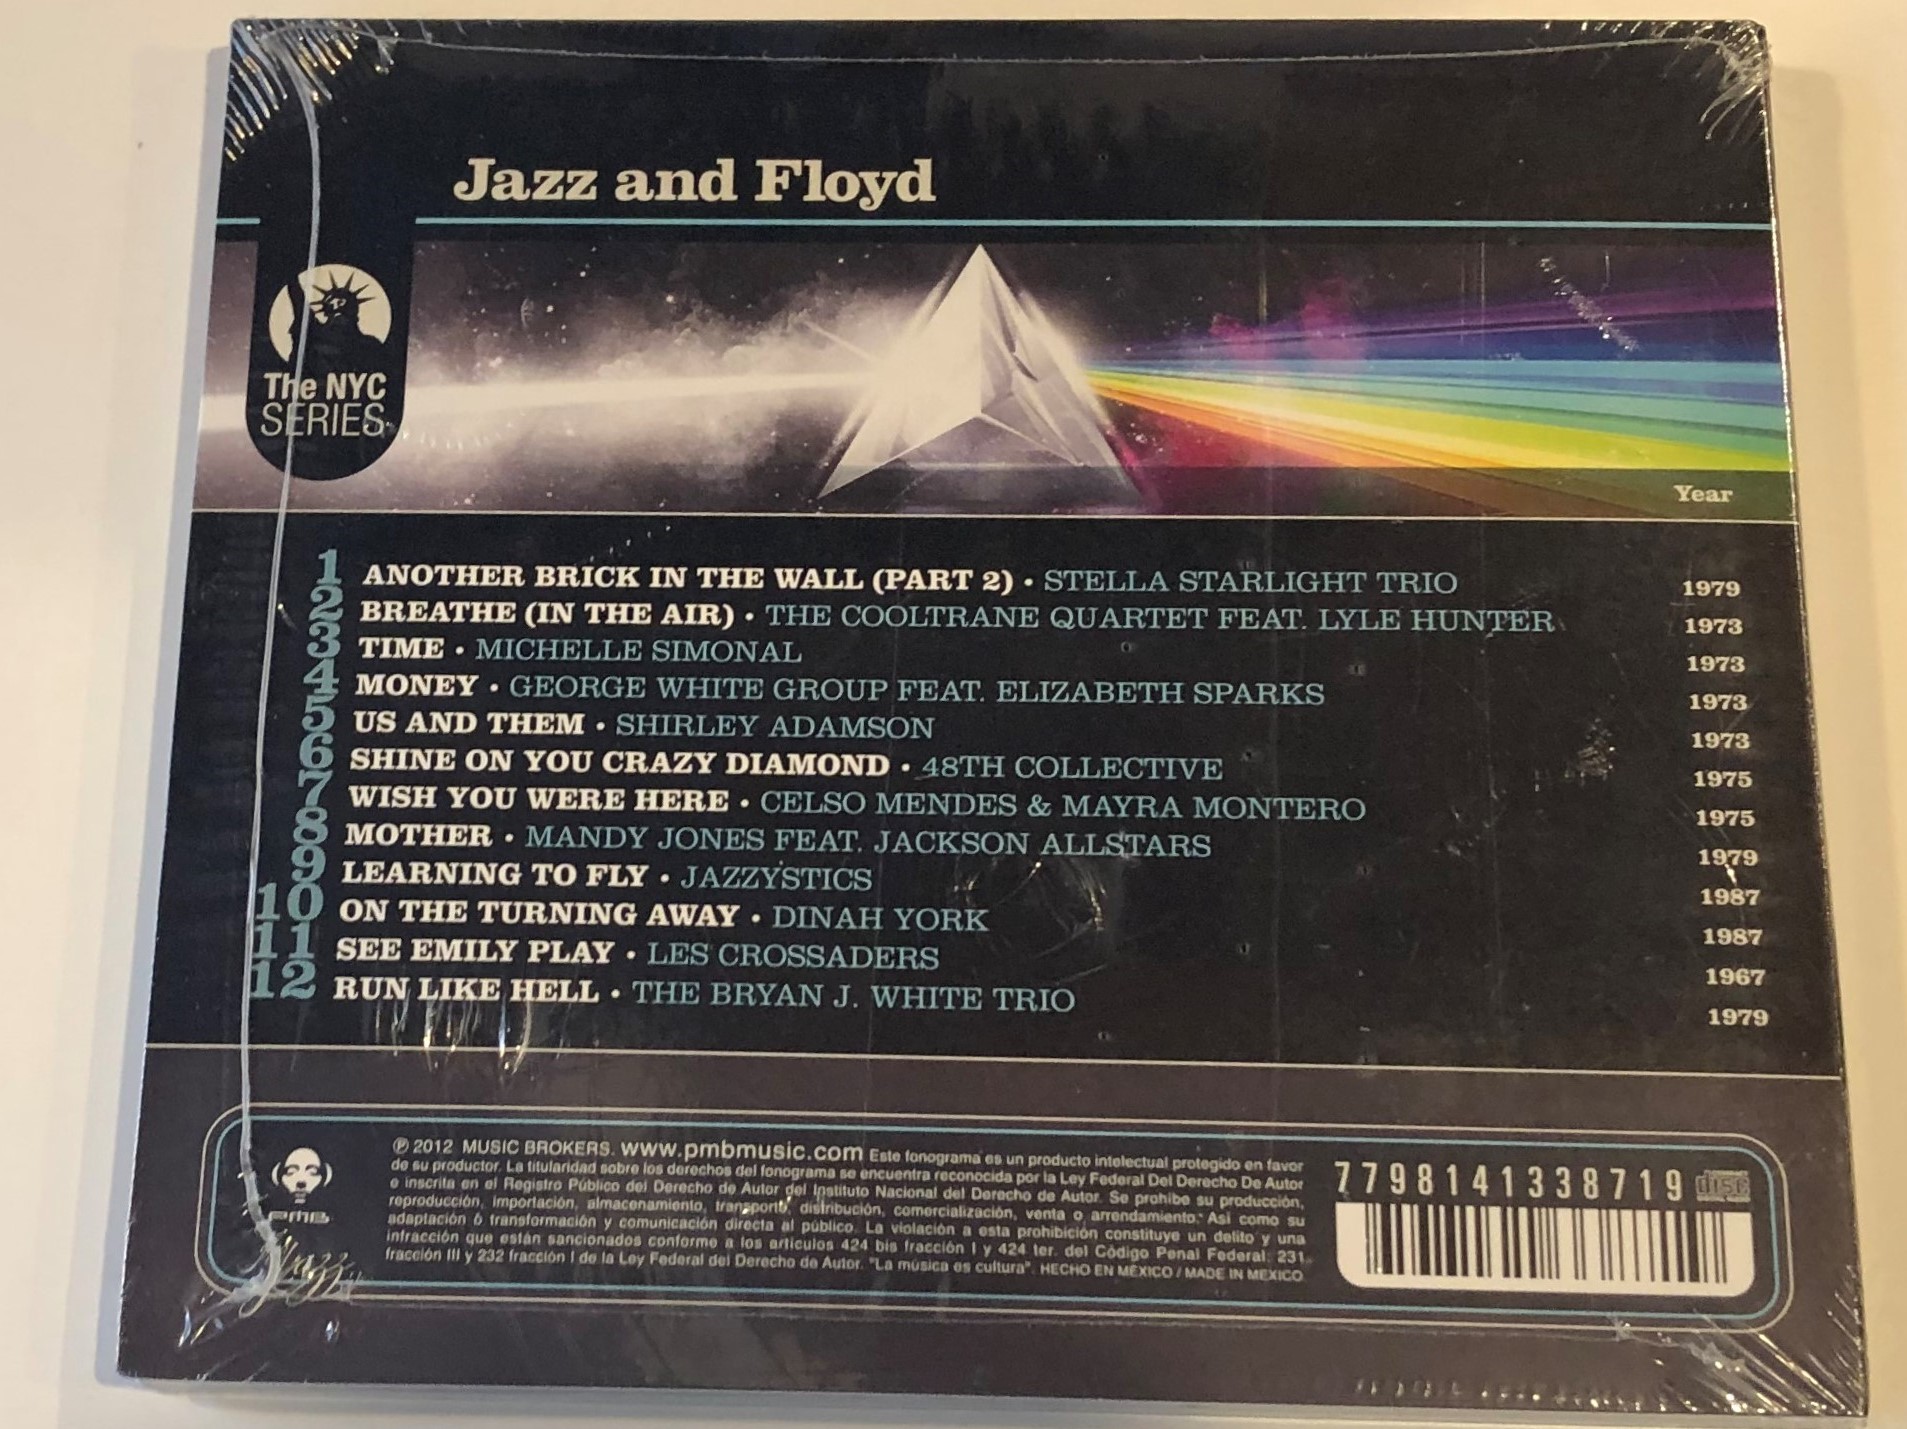 jazz-and-floyd-the-coolest-and-sexiest-songbook-of-pink-floyd-wish-you-were-here-shine-on-you-crazy-diamond-another-brick-in-the-wall-part-2-on-the-turning-away-breathe-in-the-air-mu.jpg